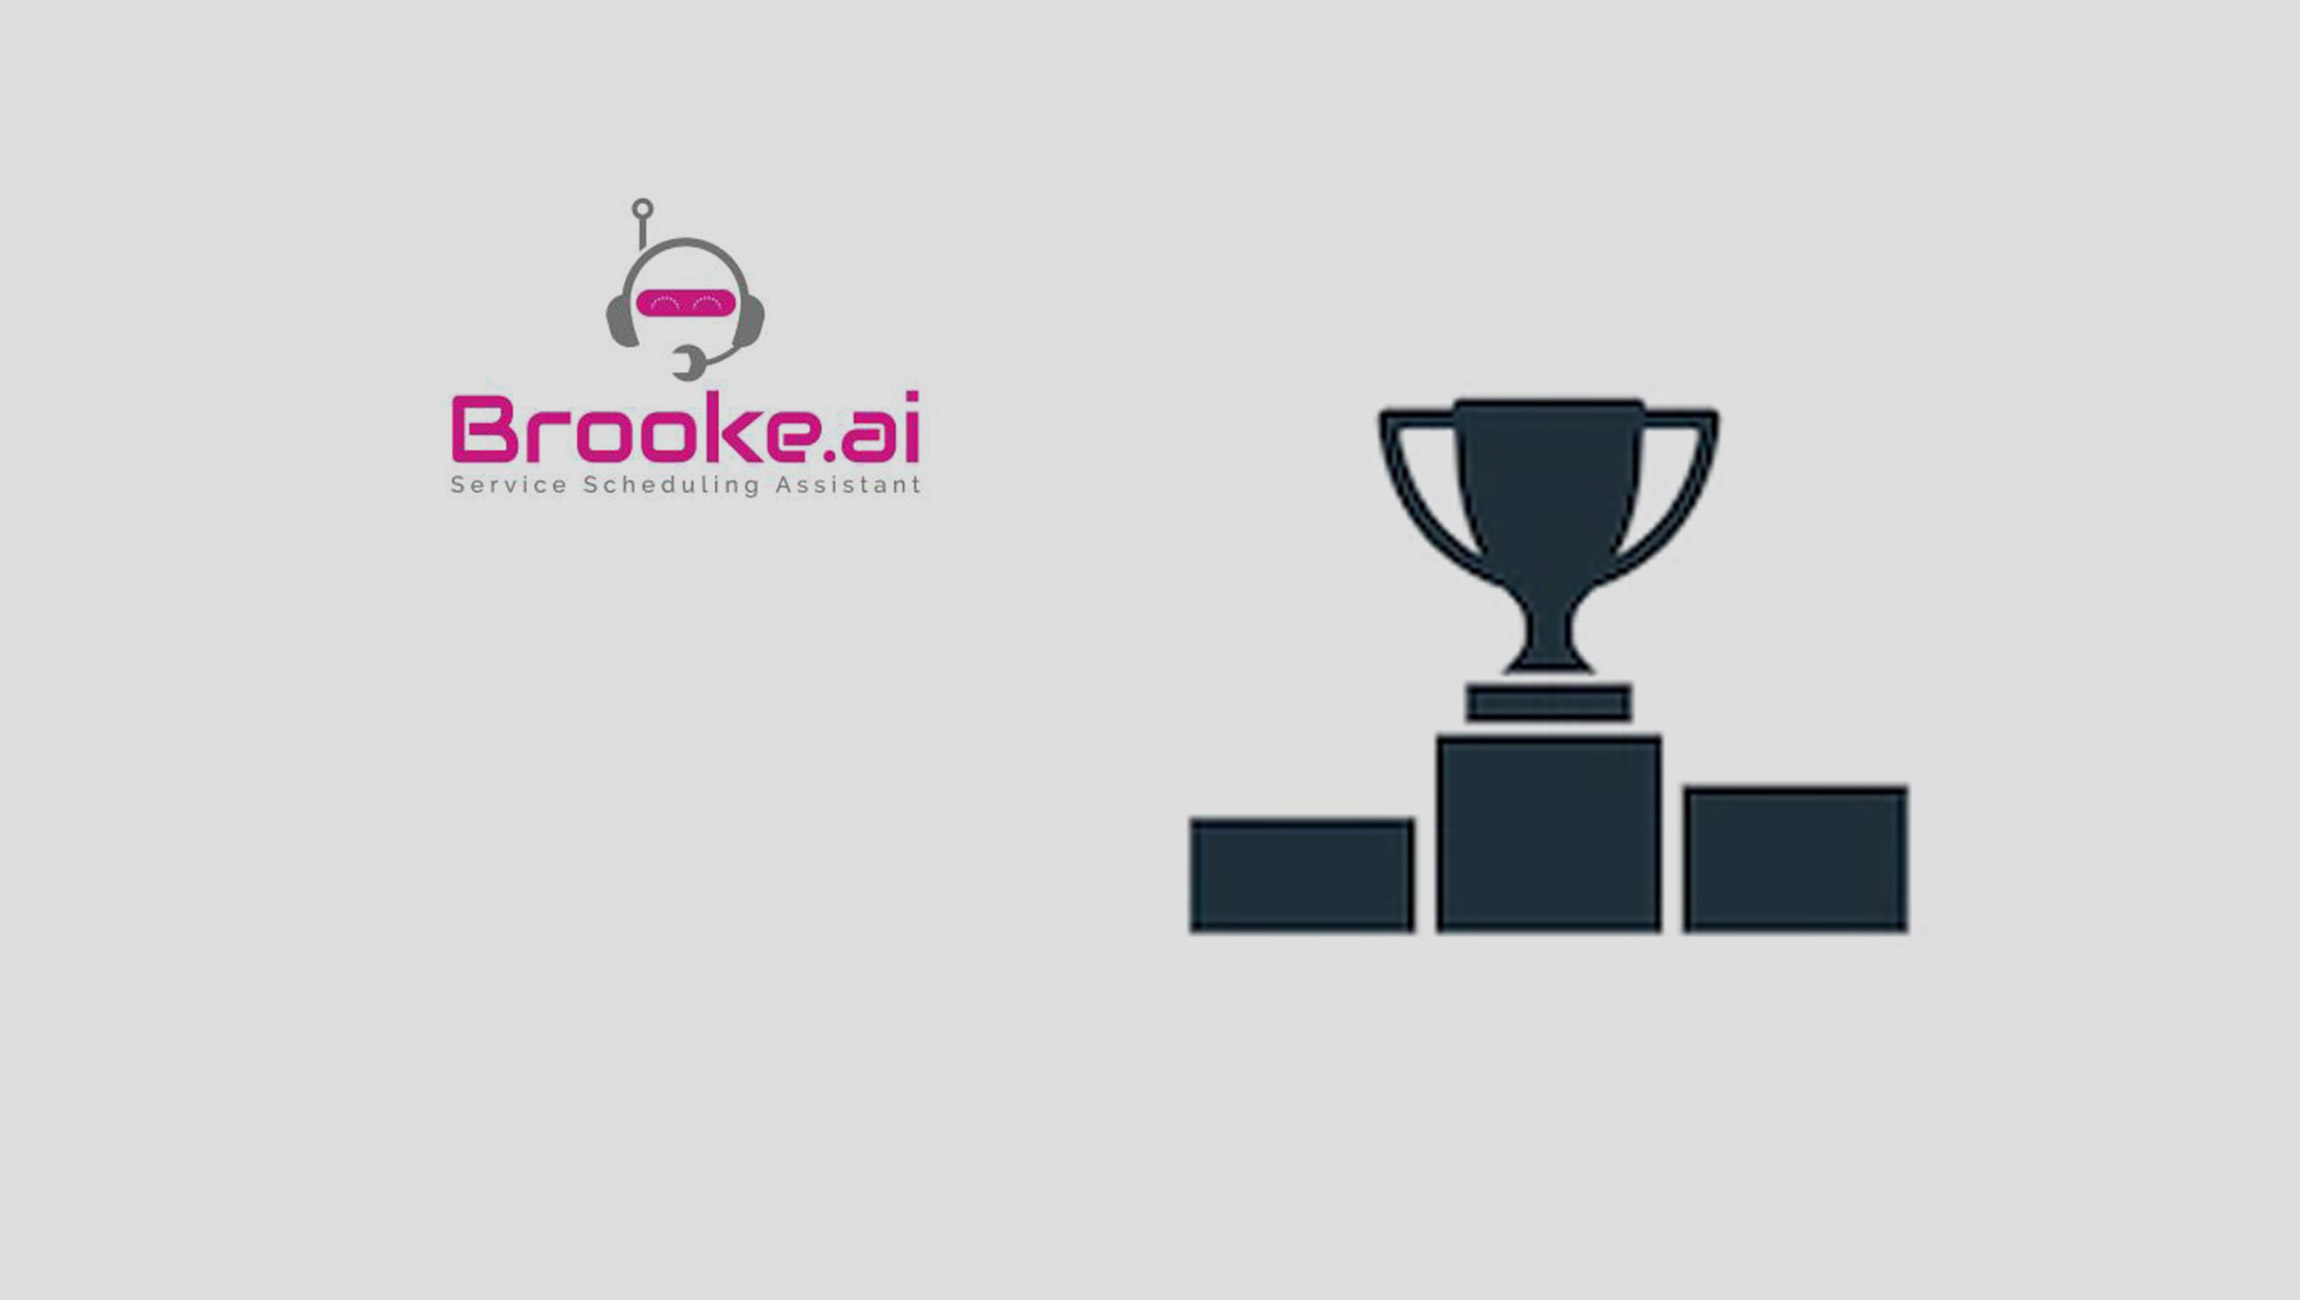 Brooke.ai Service Scheduling Assistant Powered by Proactive Dealer Solutions Wins Fixed Operations AWA Award